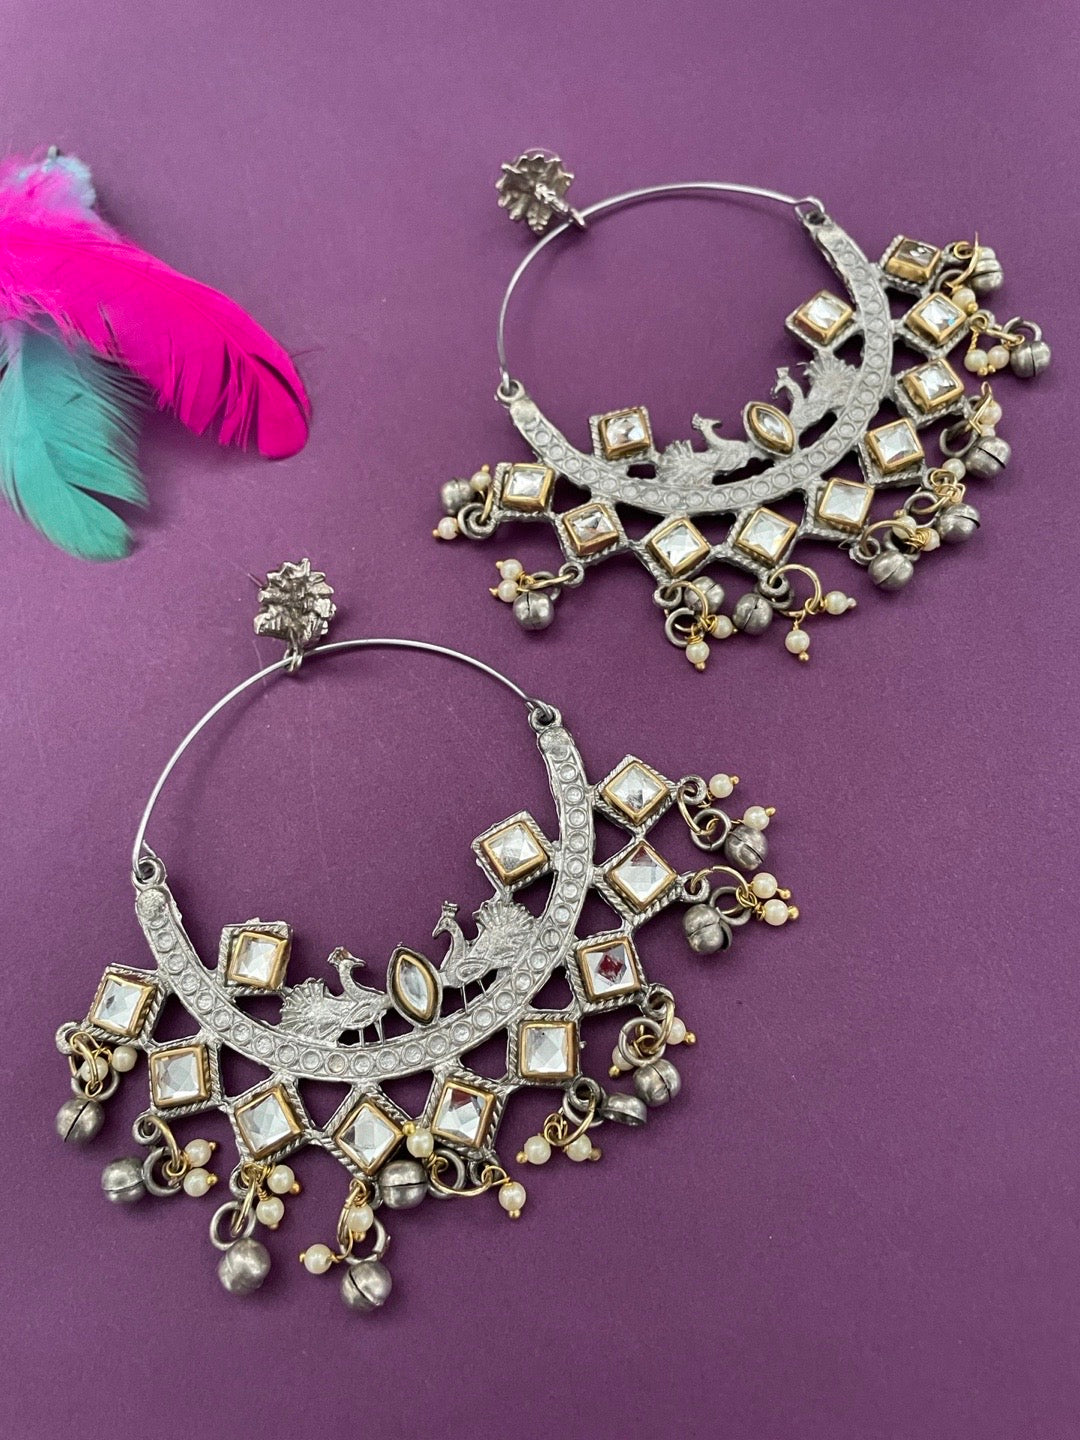 Shop Polki Chand bali Earrings from Happy Pique – Happy Pique